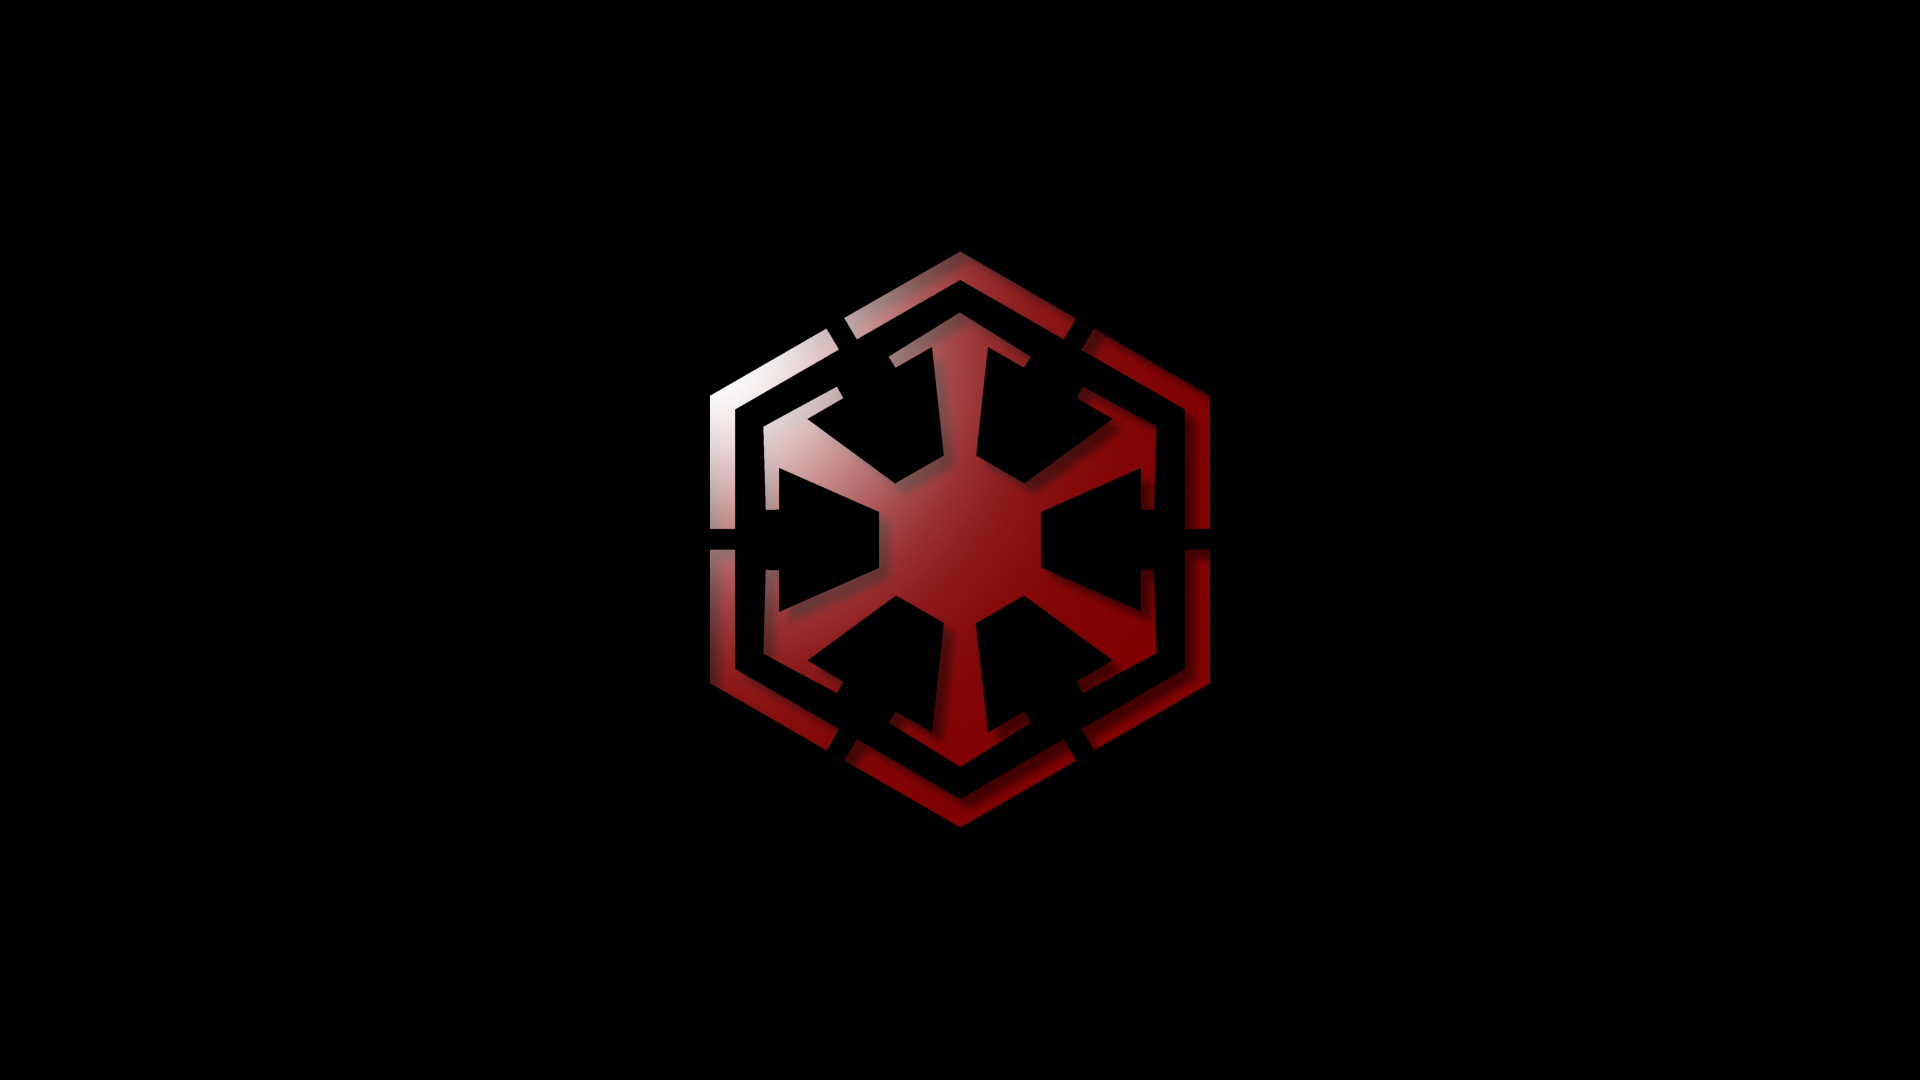 The Simple Swtor Sith Wallpaper By Distantwanderer